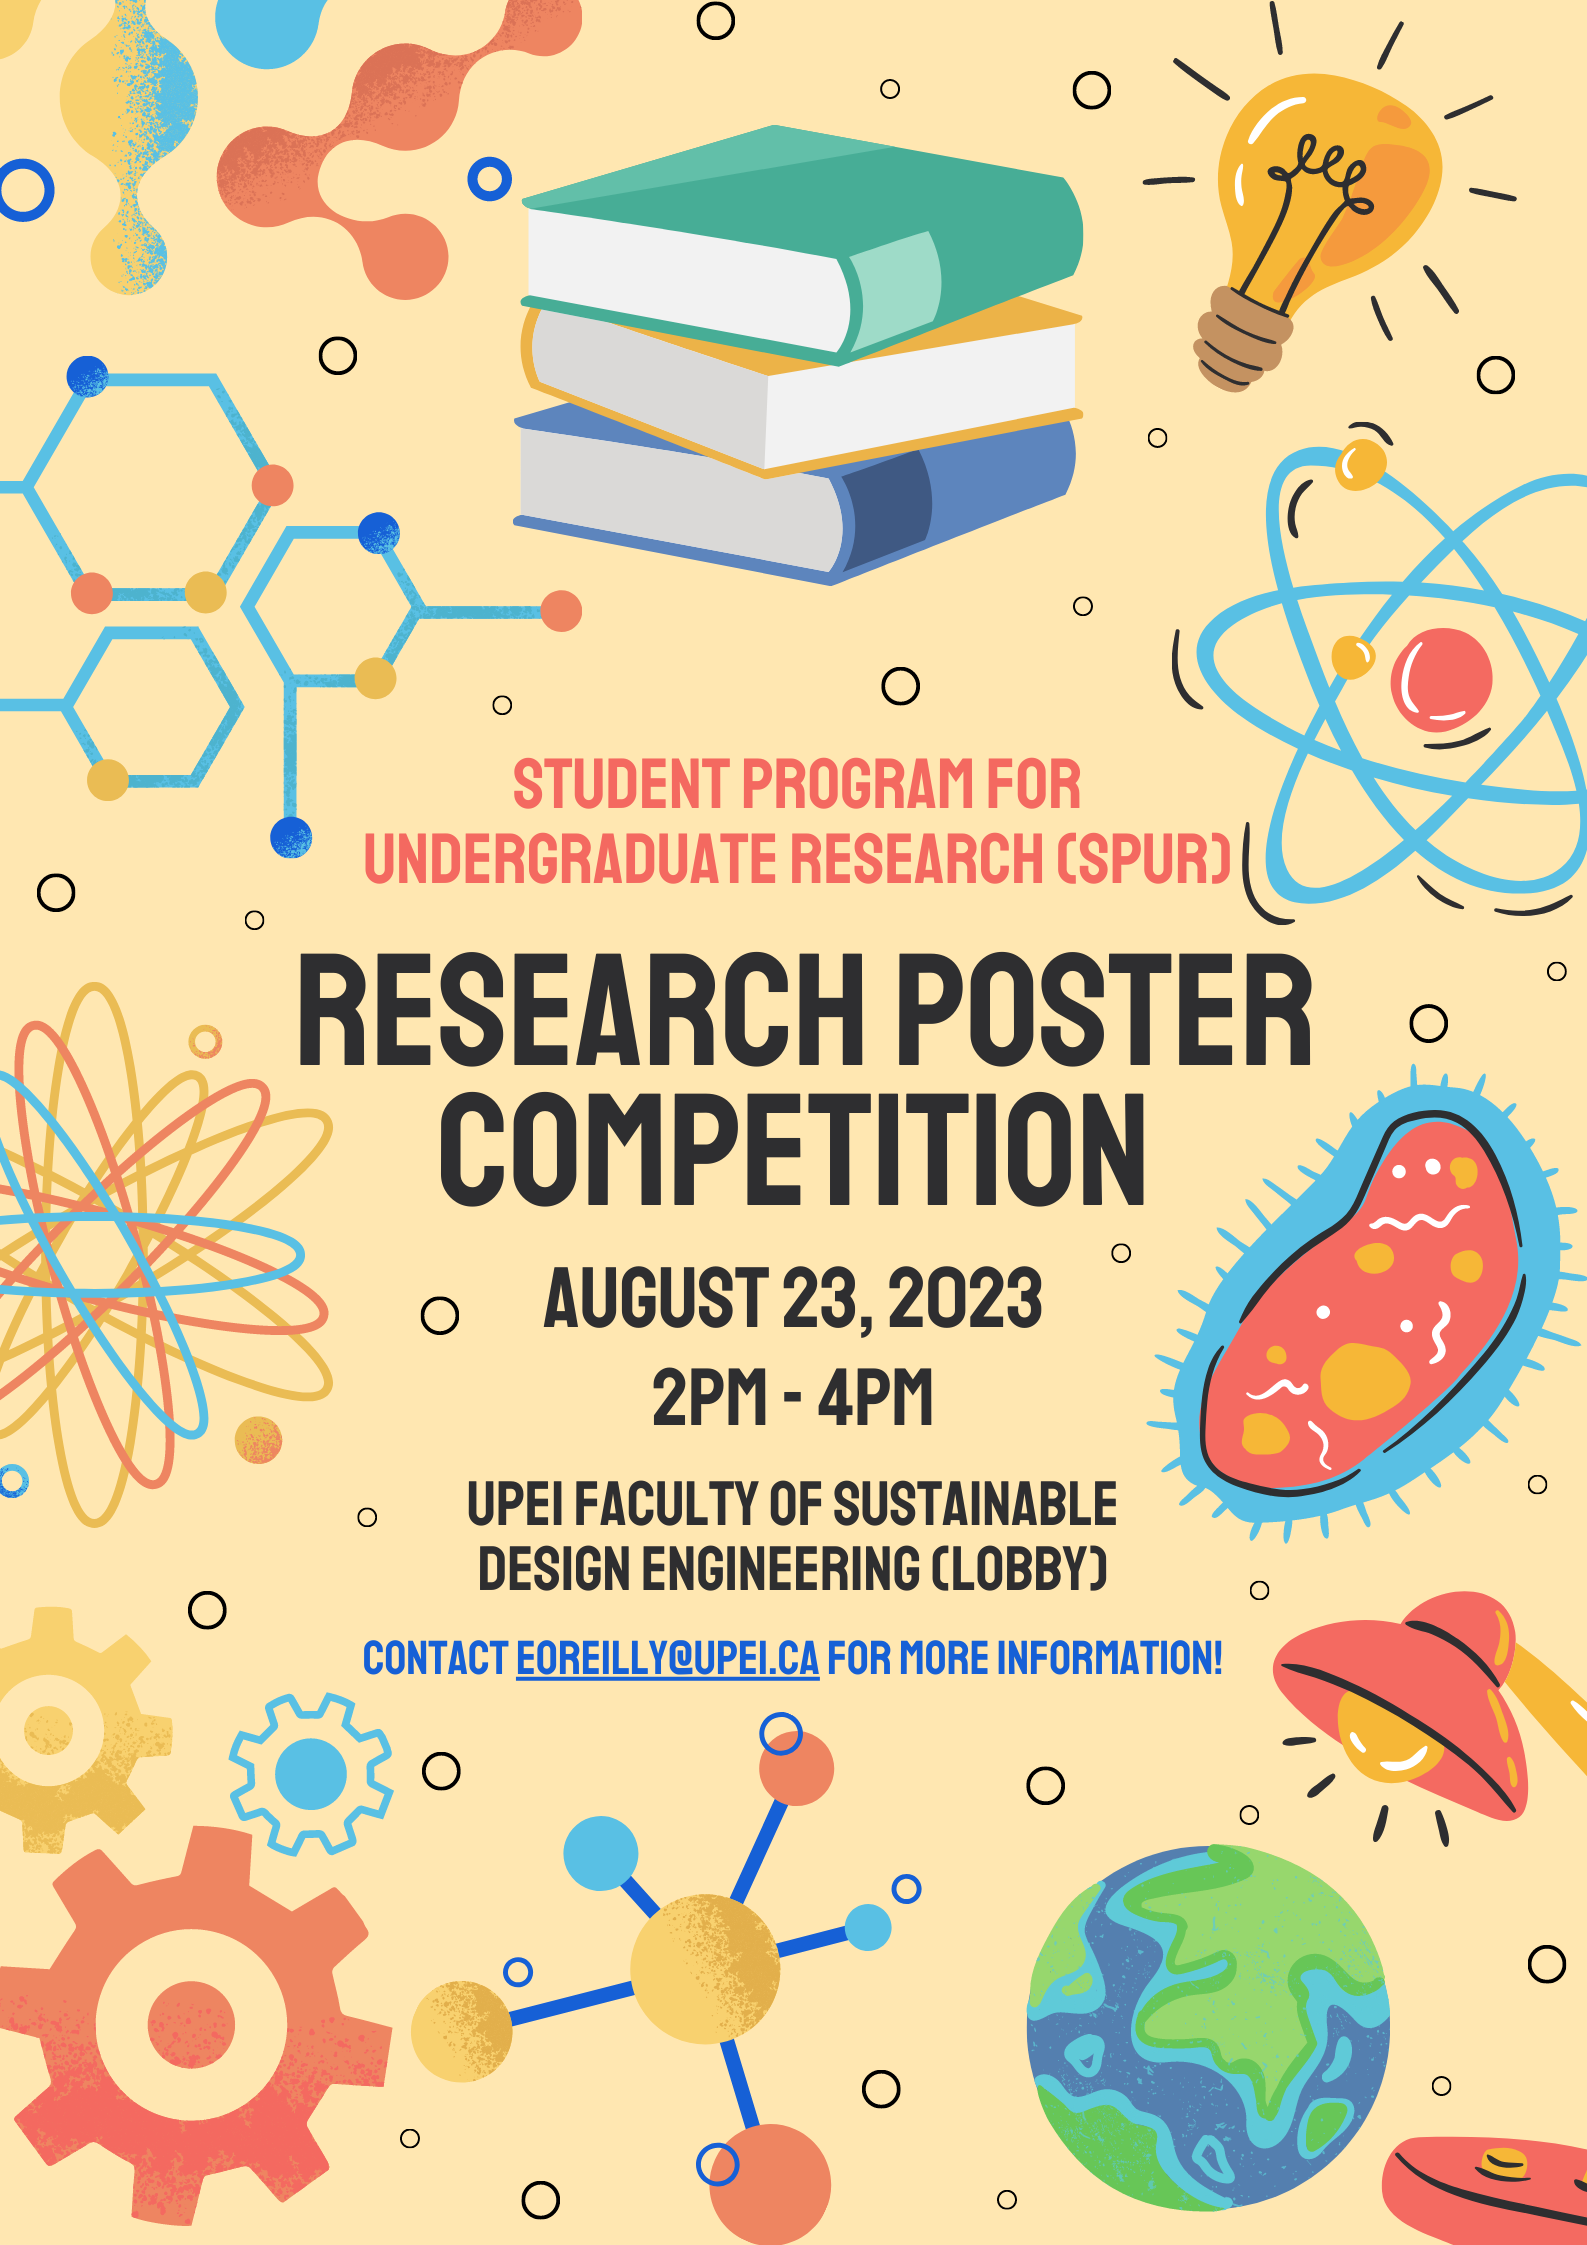 Student Program for Undergraduate Research (SPUR) Research Poster Competition, August 23rd, 2023, 2pm-4pm, UPEI Faculty of Sustainable Design Engineering Lobby, Contact eorielly@upei.ca for more information!